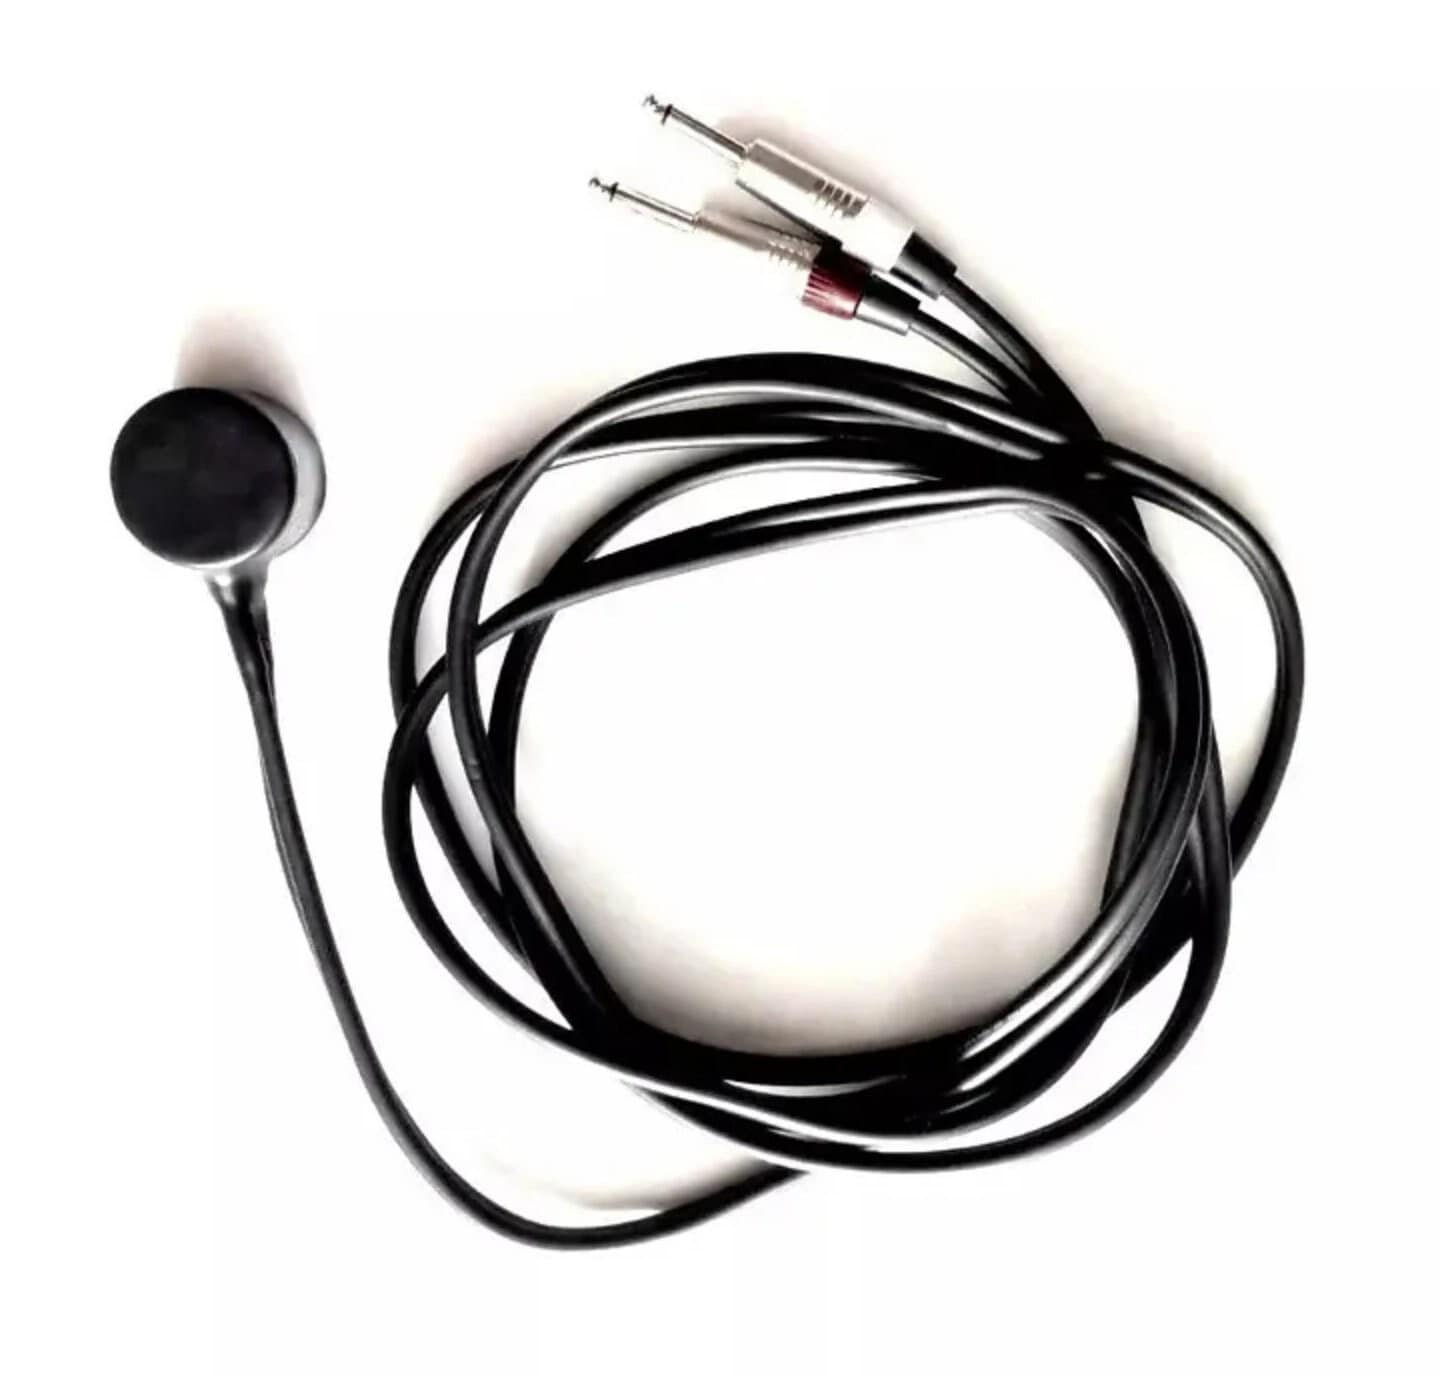 High Quality Piezo Contact Microphone, Mono Jack 3.5mm, 120cm cable